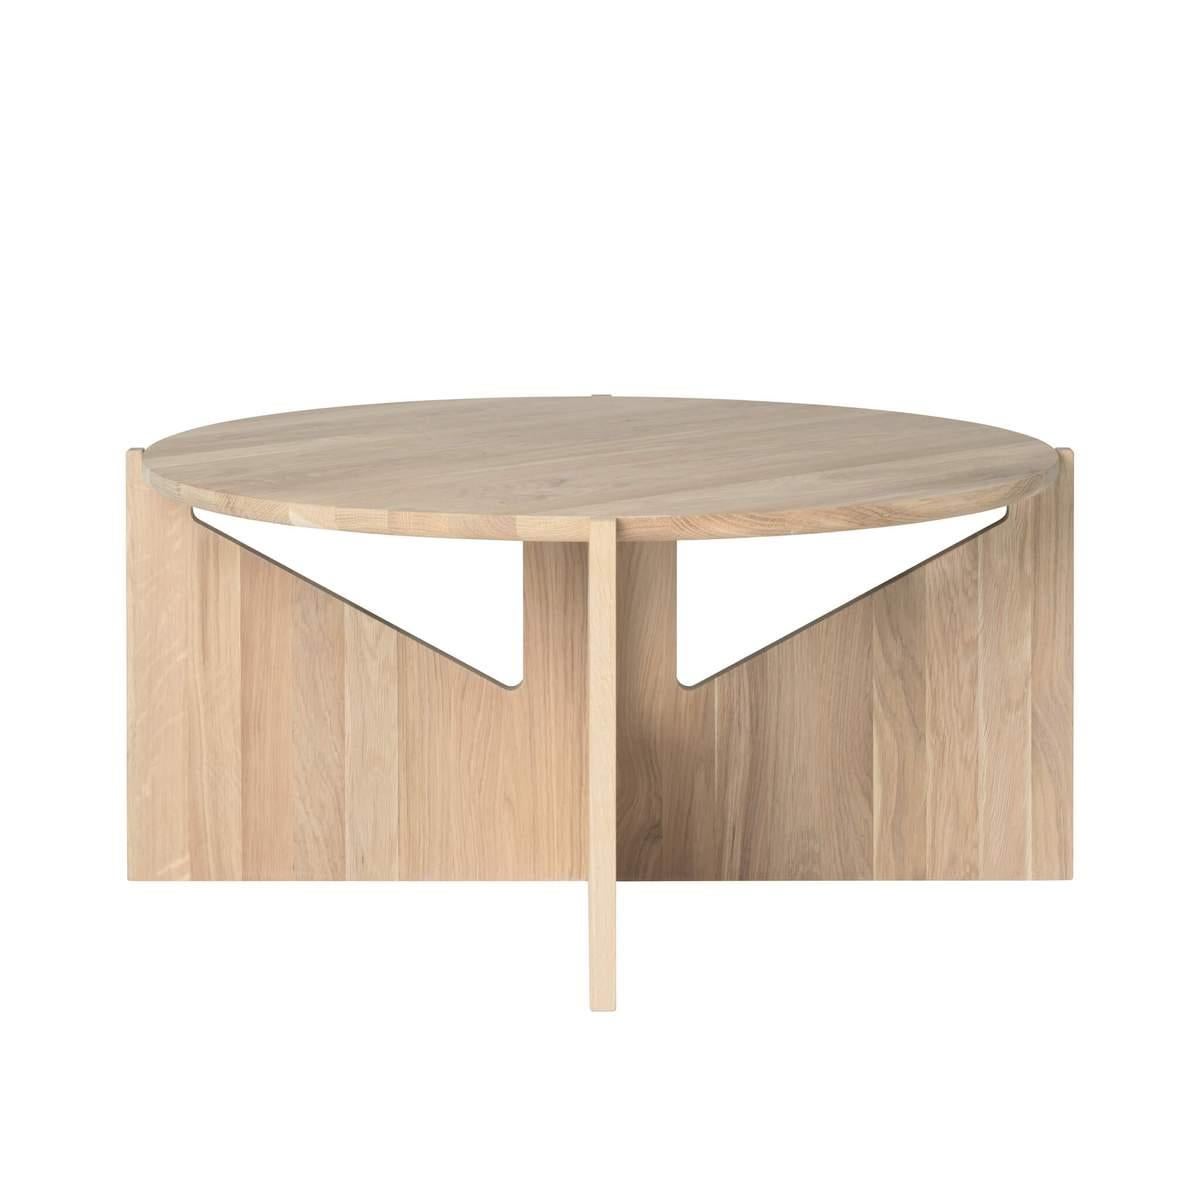 Oak table by Kristina Dam Studio.
Materials: Solid oak with oil treatment. 
Also available in other colors and sizes.
Dimensions: 78 x 78 x H 36cm.

XL Oak Table is a huge coffee table based on the exact same design as the Stool and Table. This